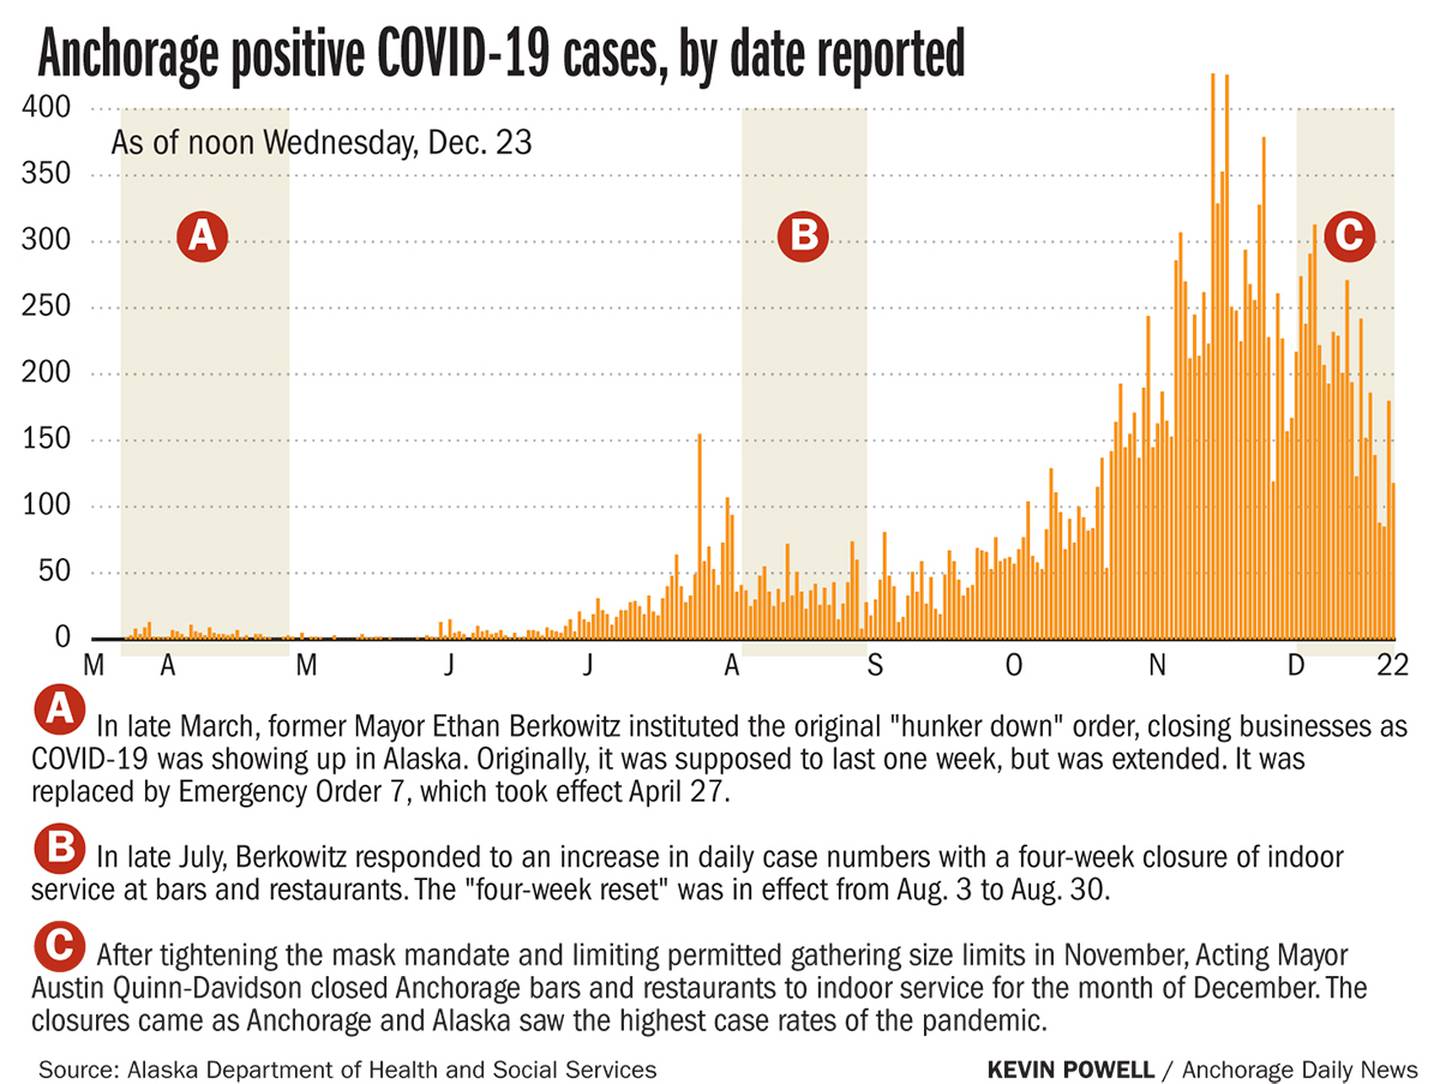 Covid Anchorage cases by report date